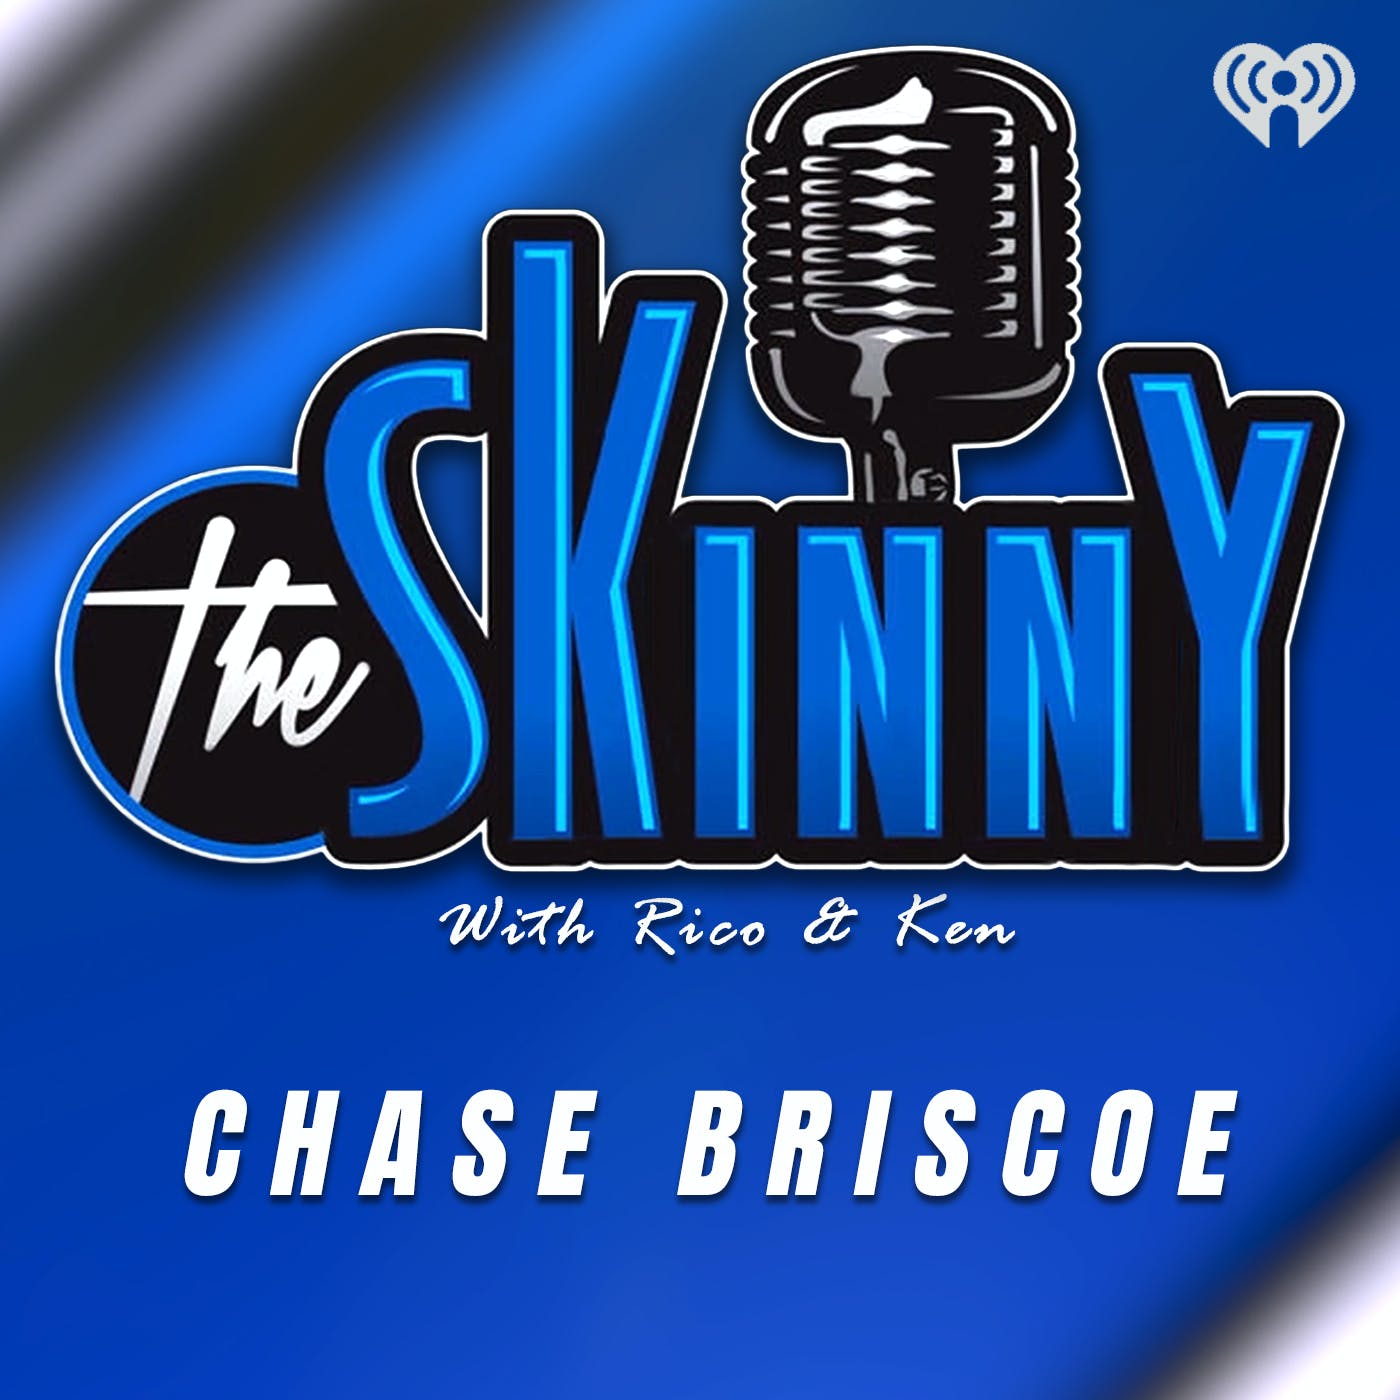 Chase Briscoe is this week's guest on The Skinny with Rico and Ken